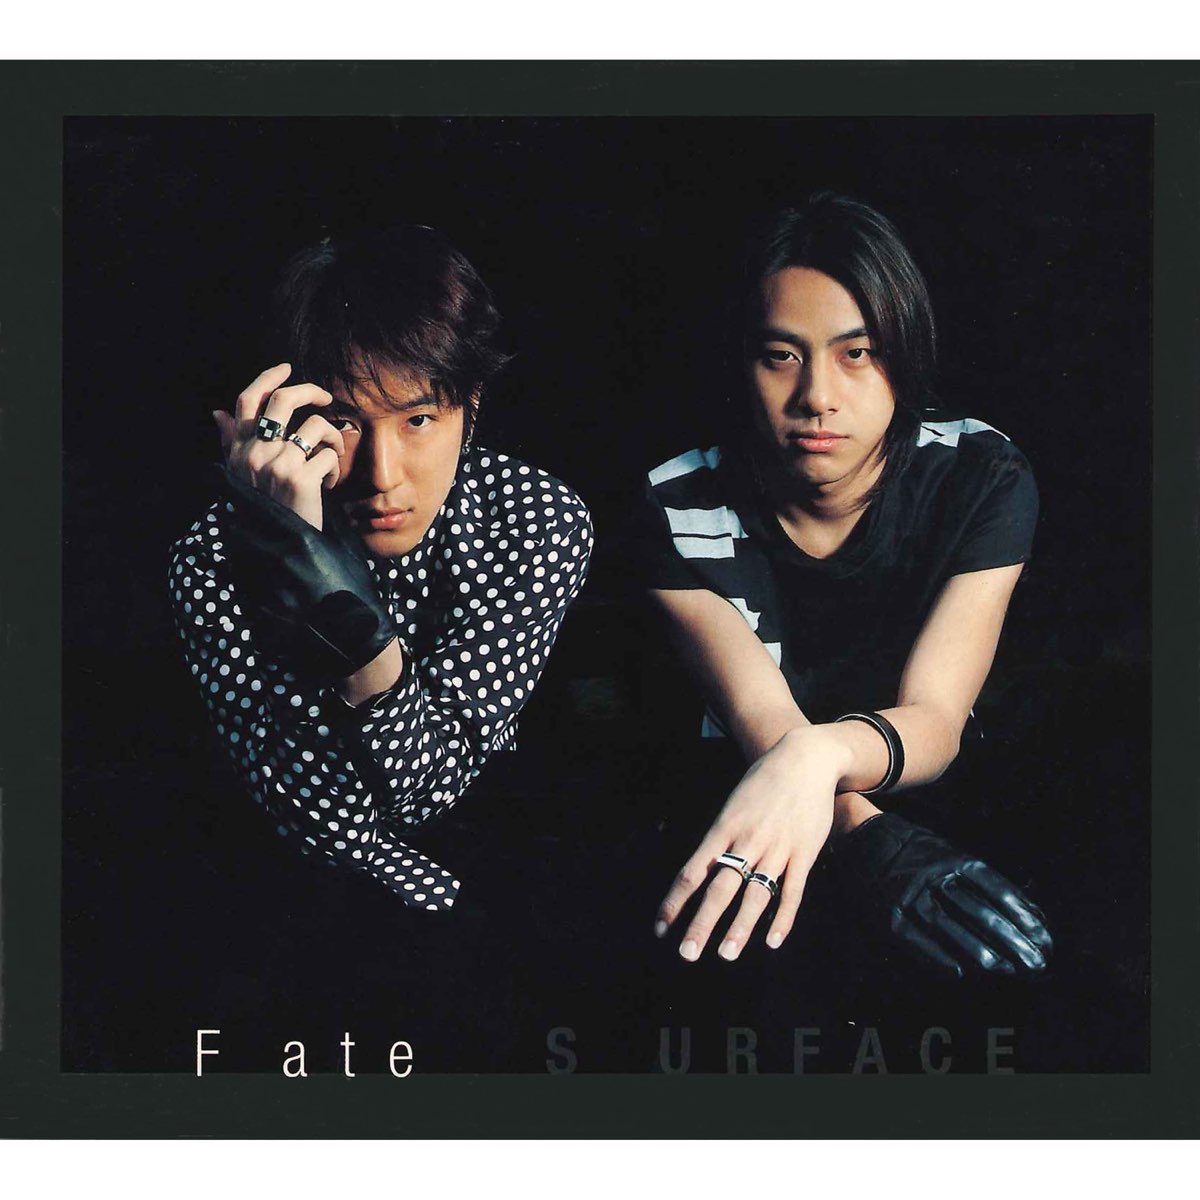 Fate - Album by Surface - Apple Music